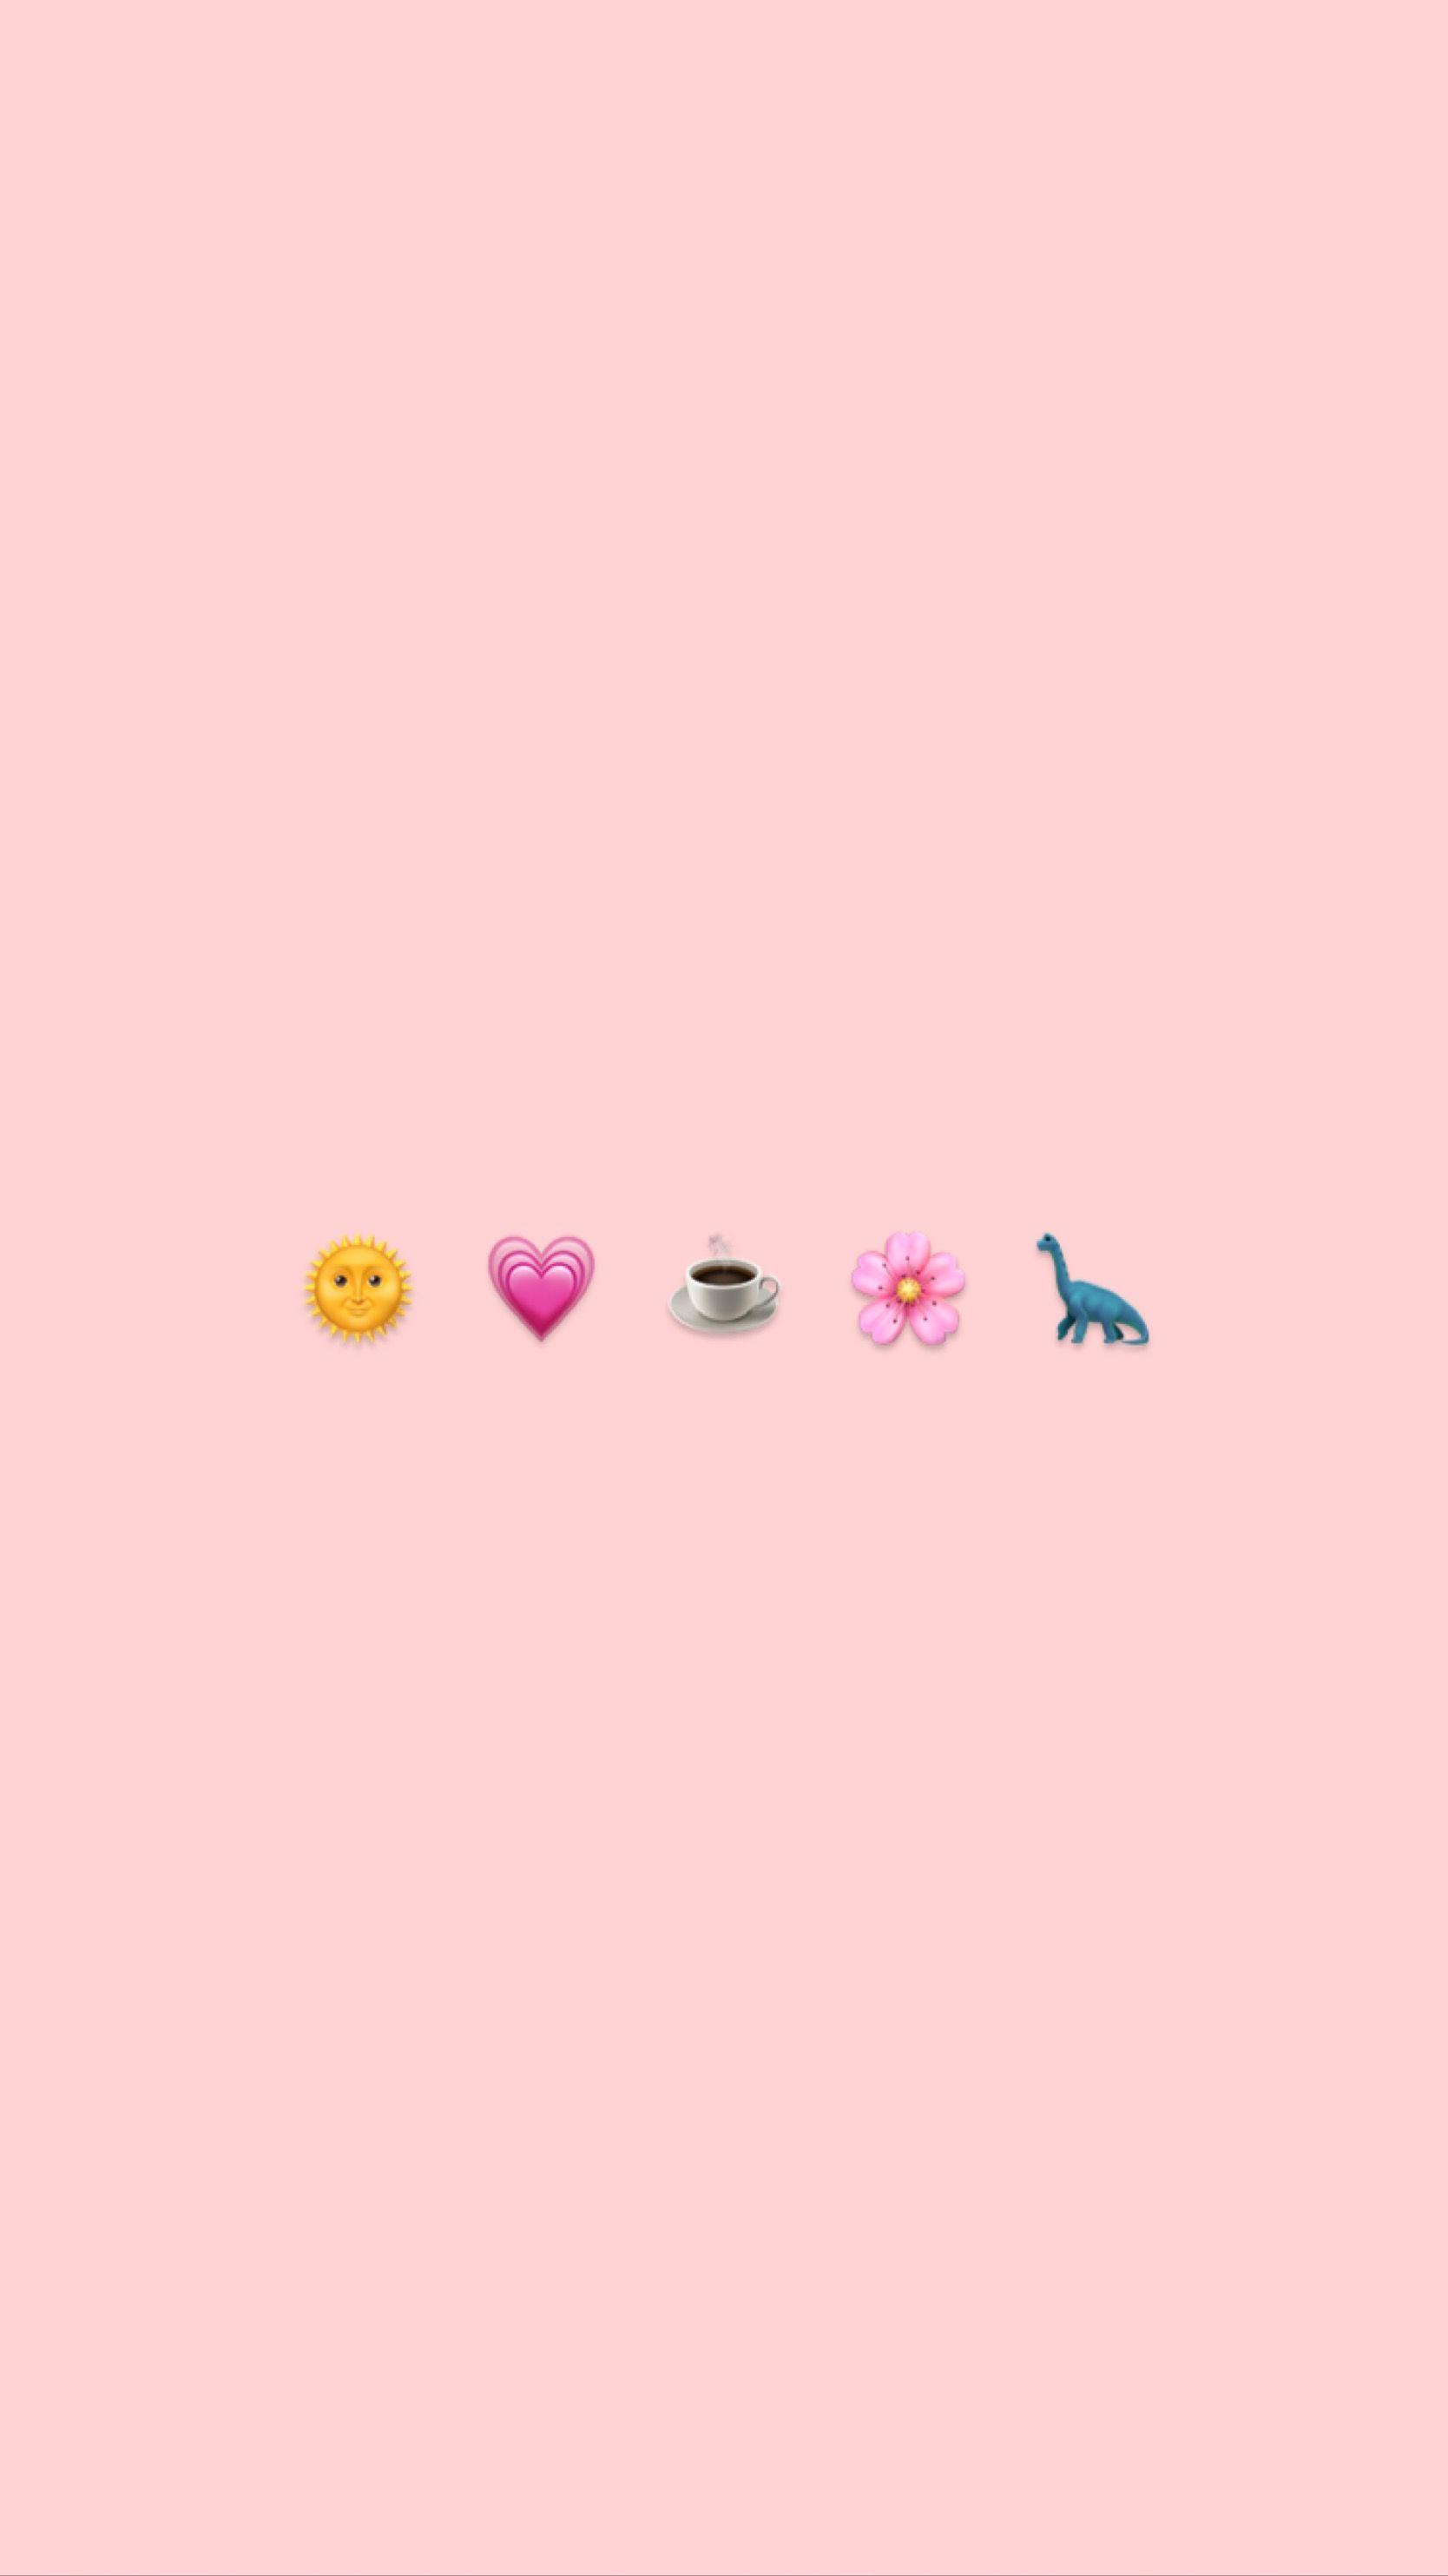 Aesthetic phone background with emojis of a sun, heart, coffee, flower, and dinosaur - Emoji